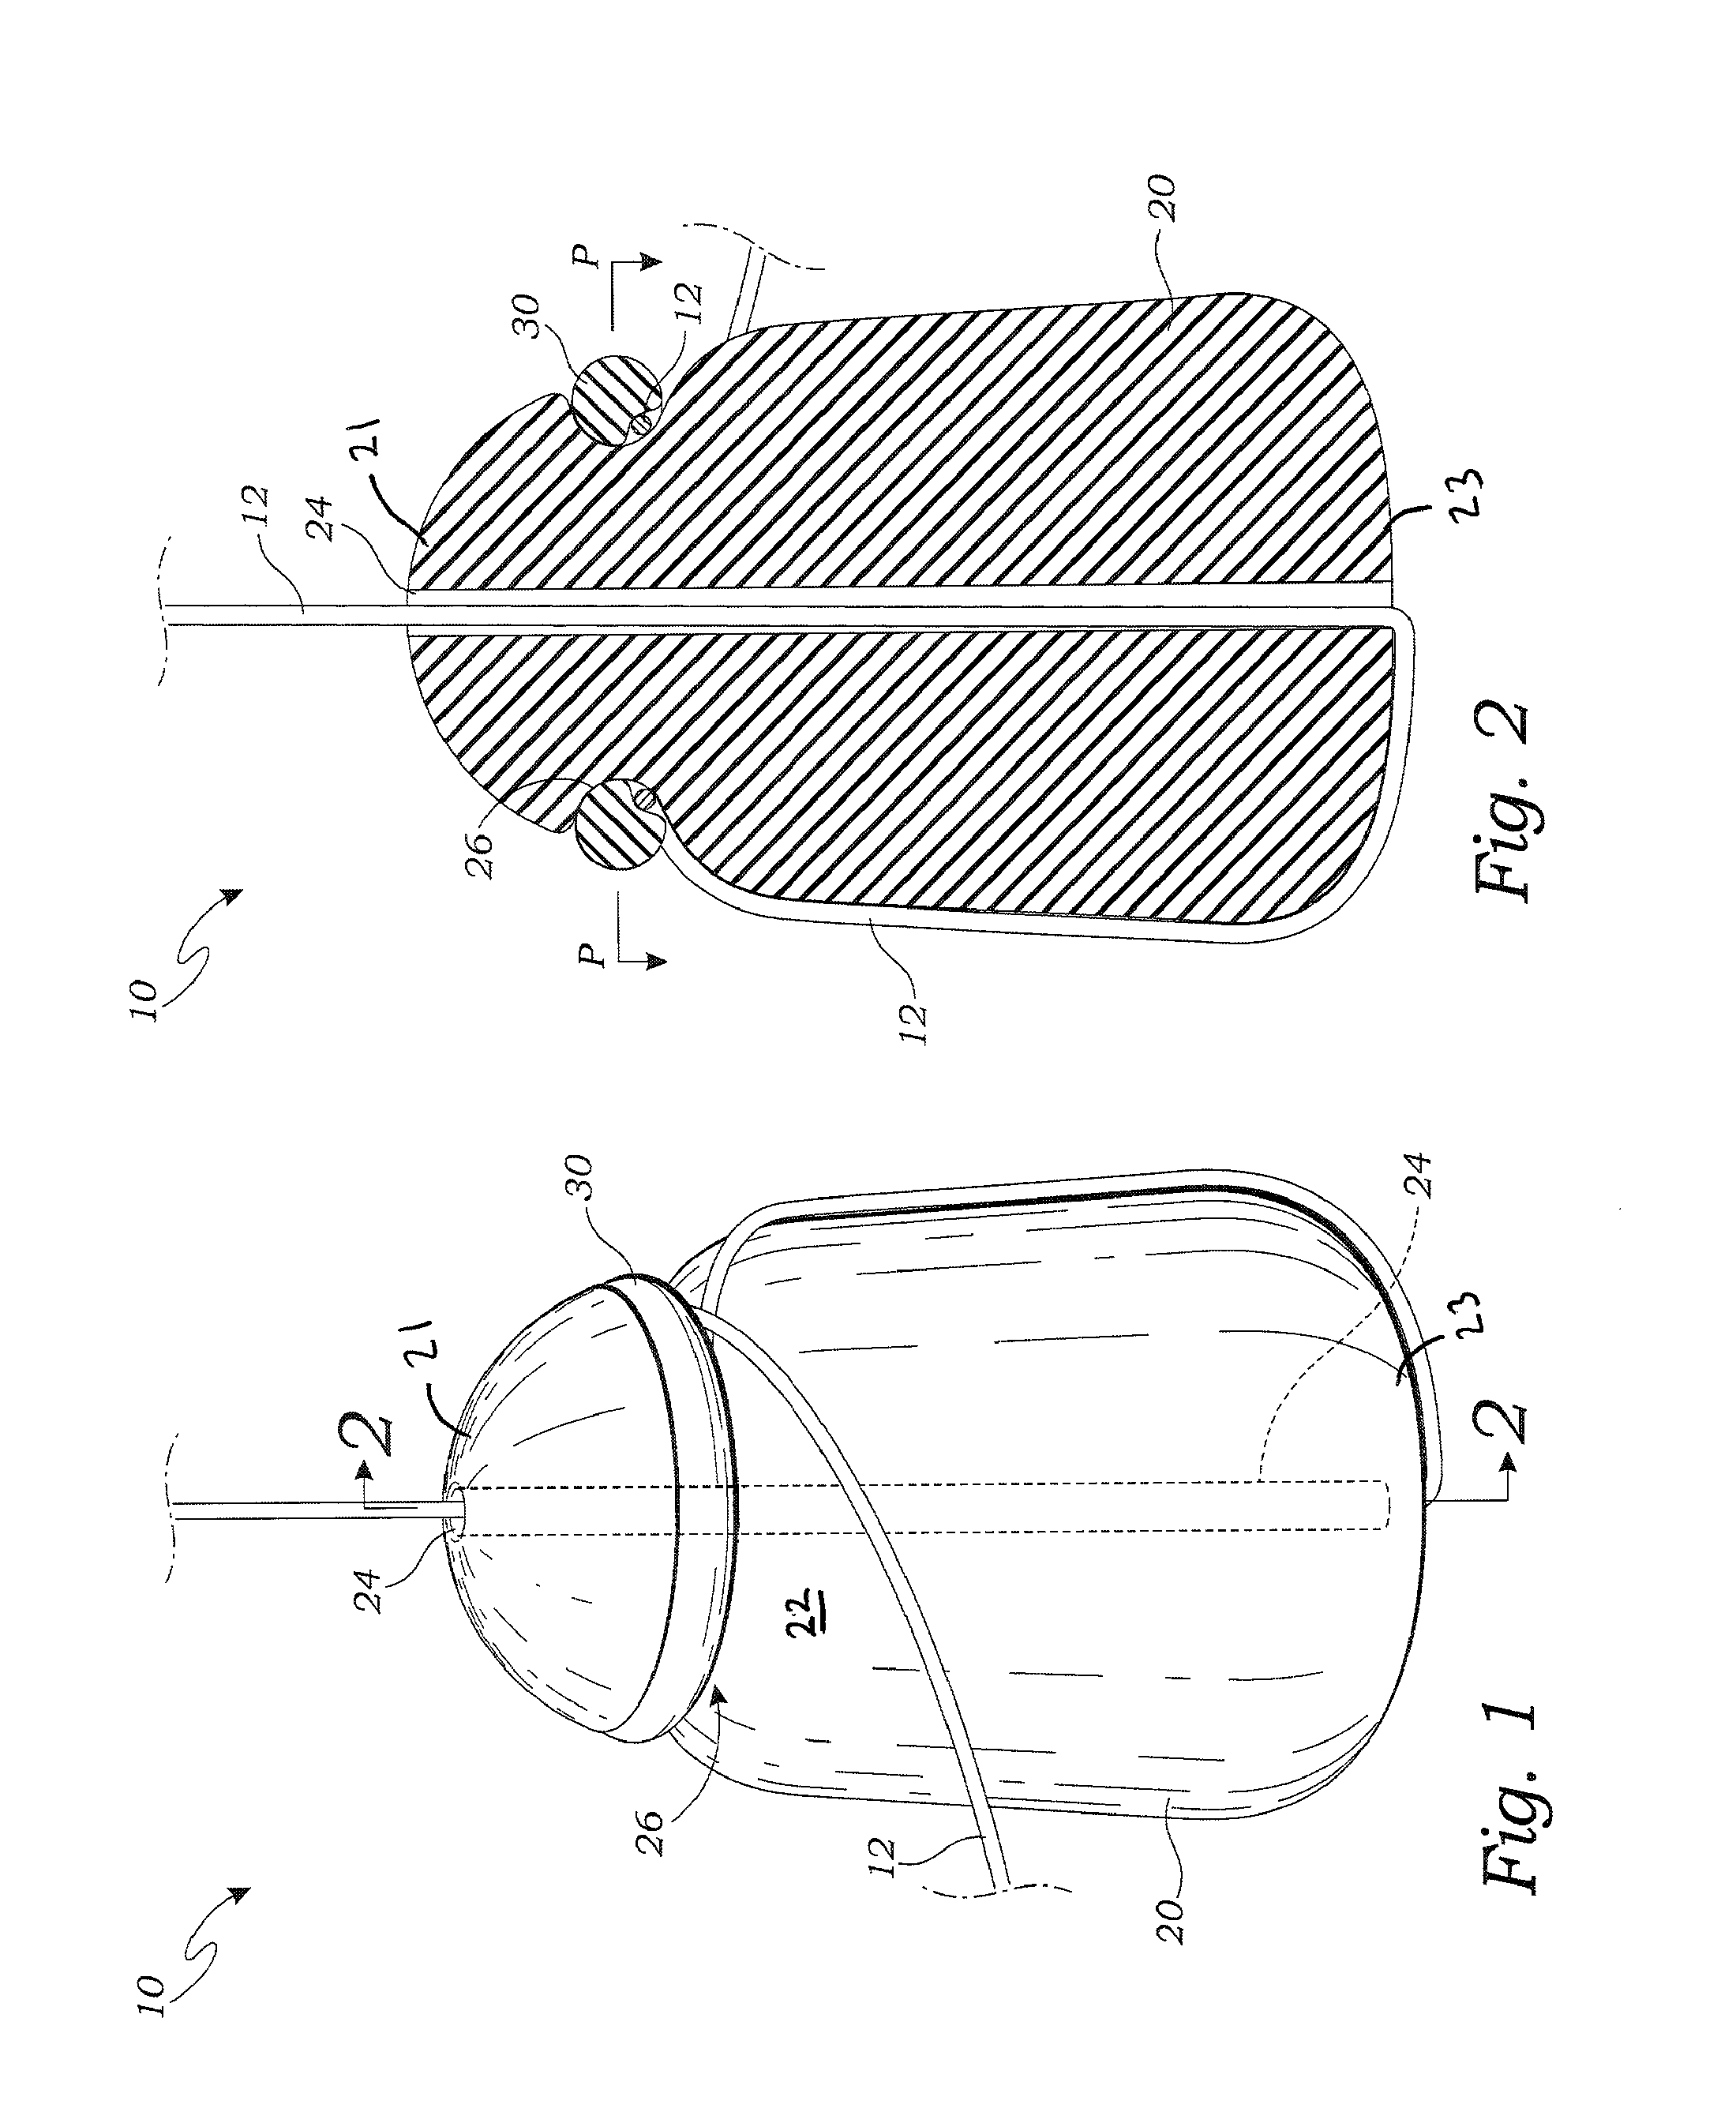 Fishing device and method of attachment to a fishing line